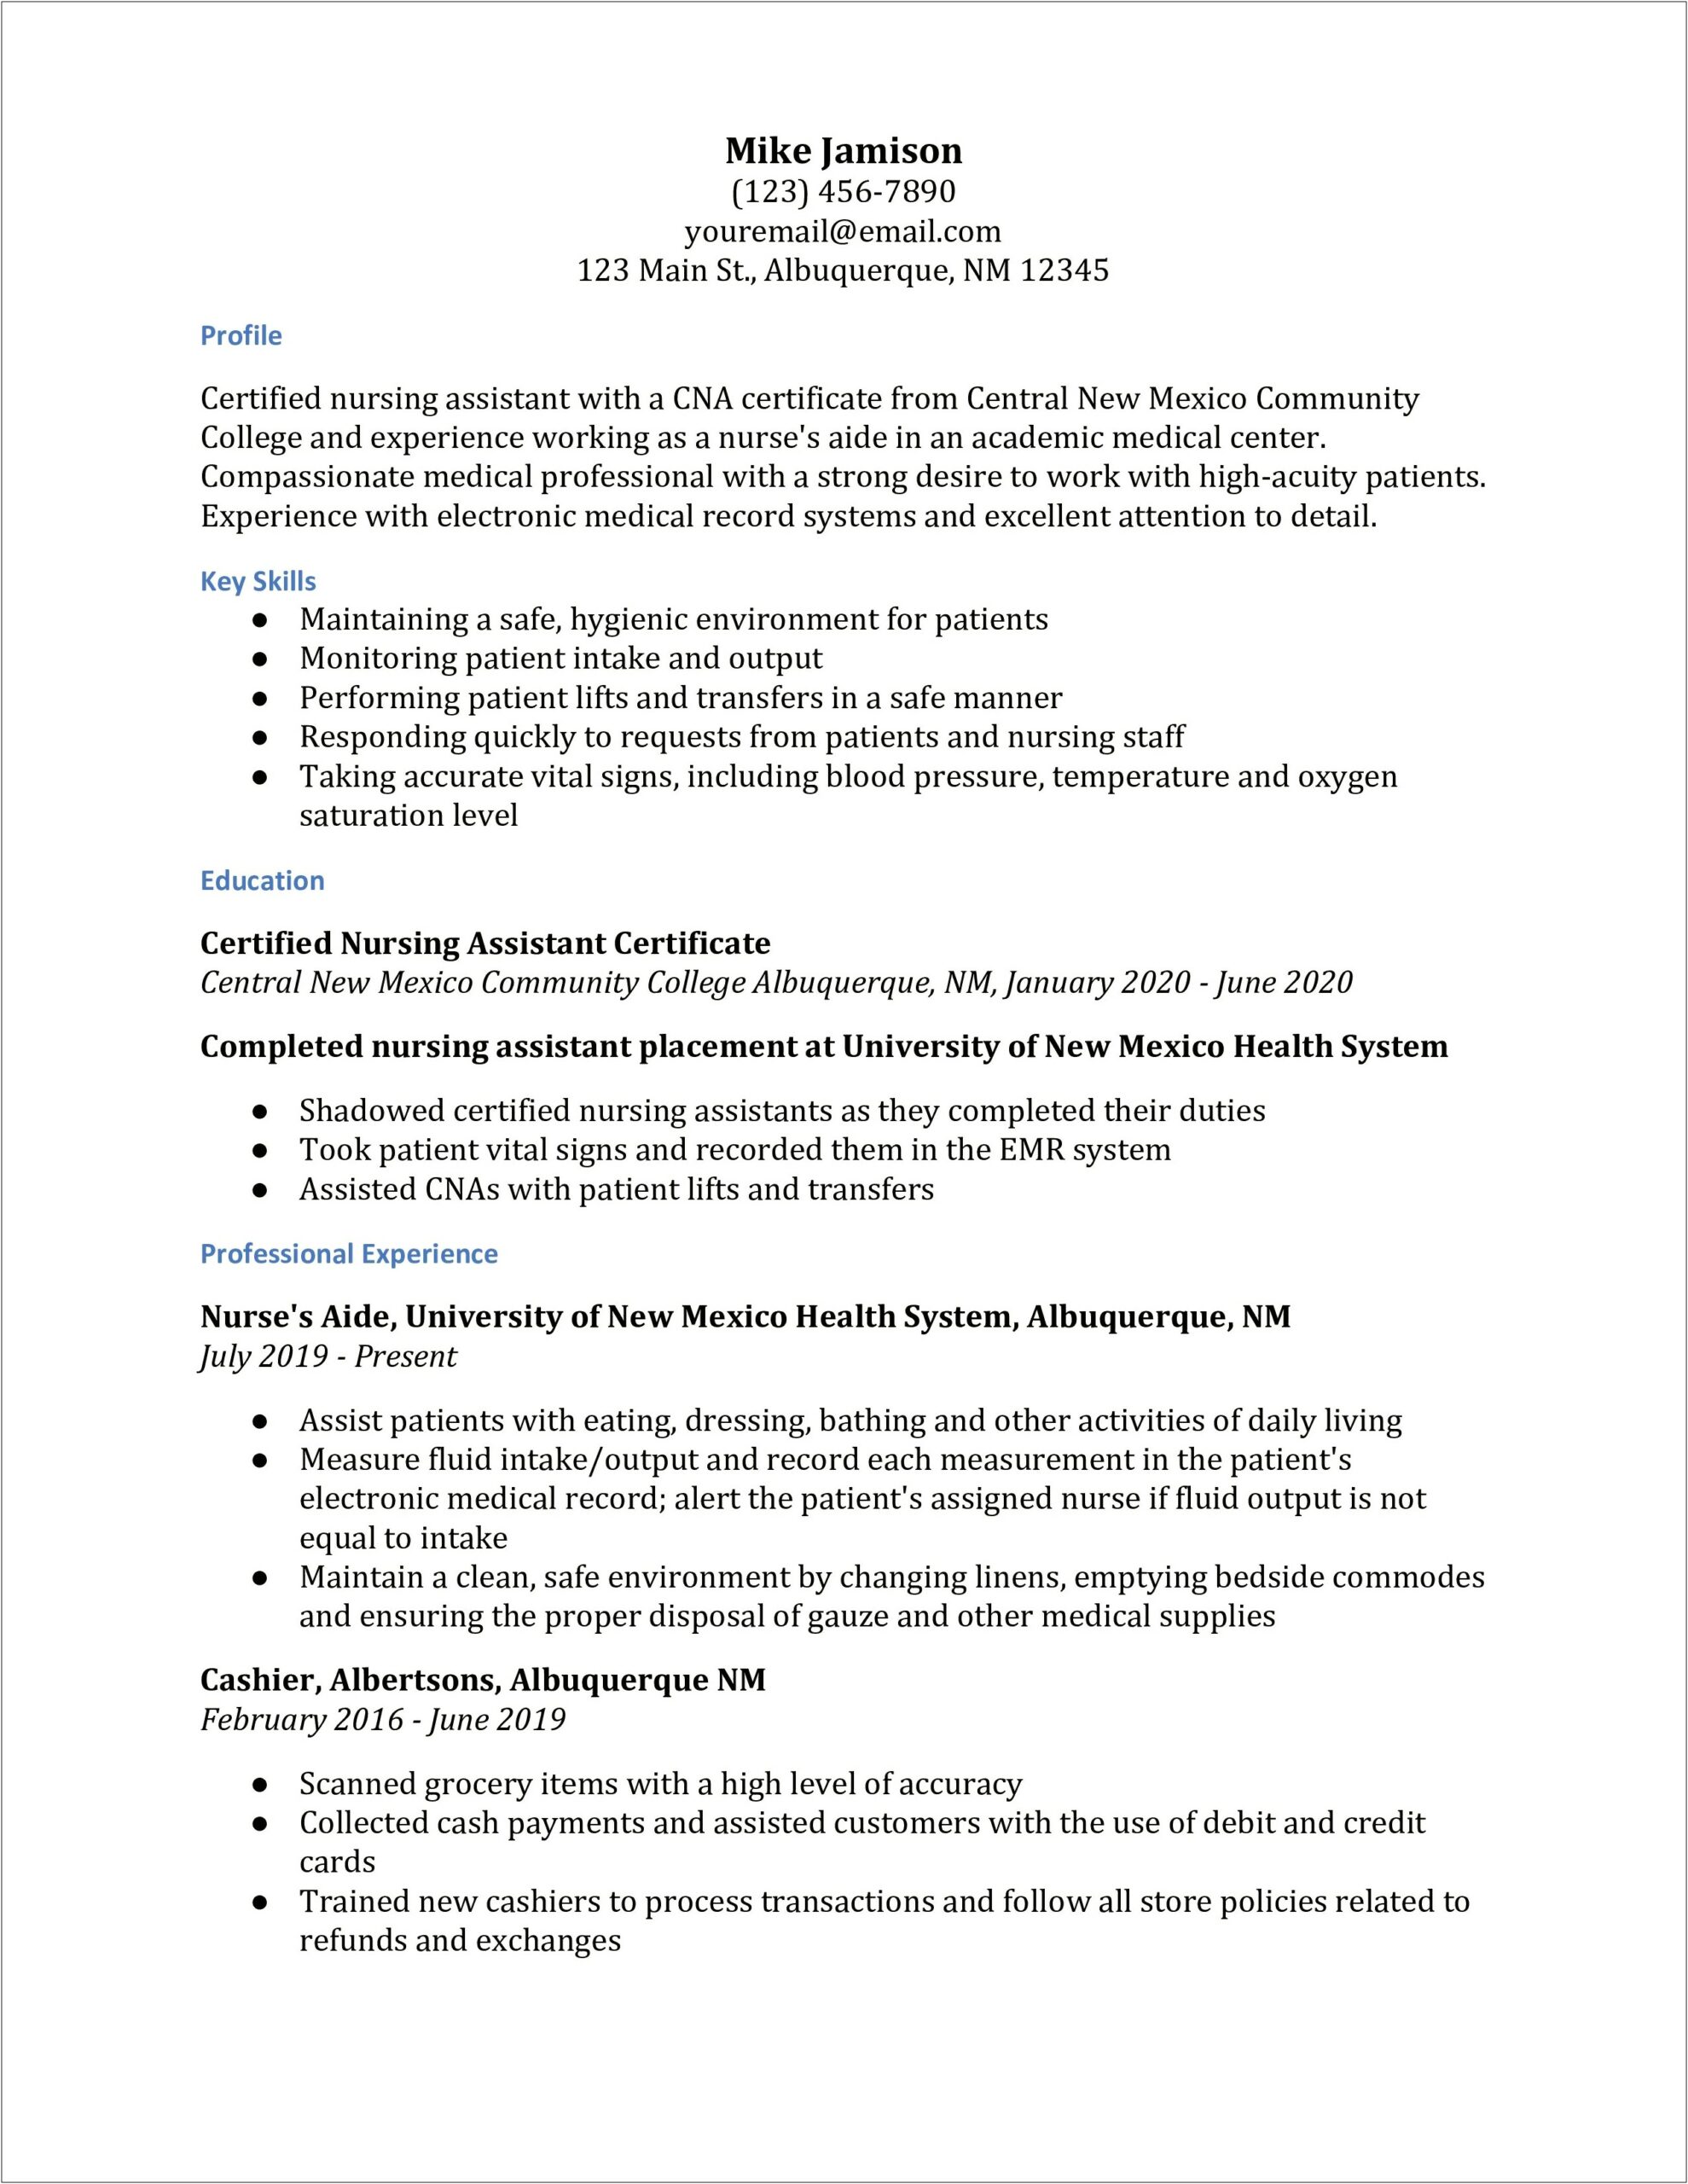 Nursing Assistant Skills And Abilities On Resume